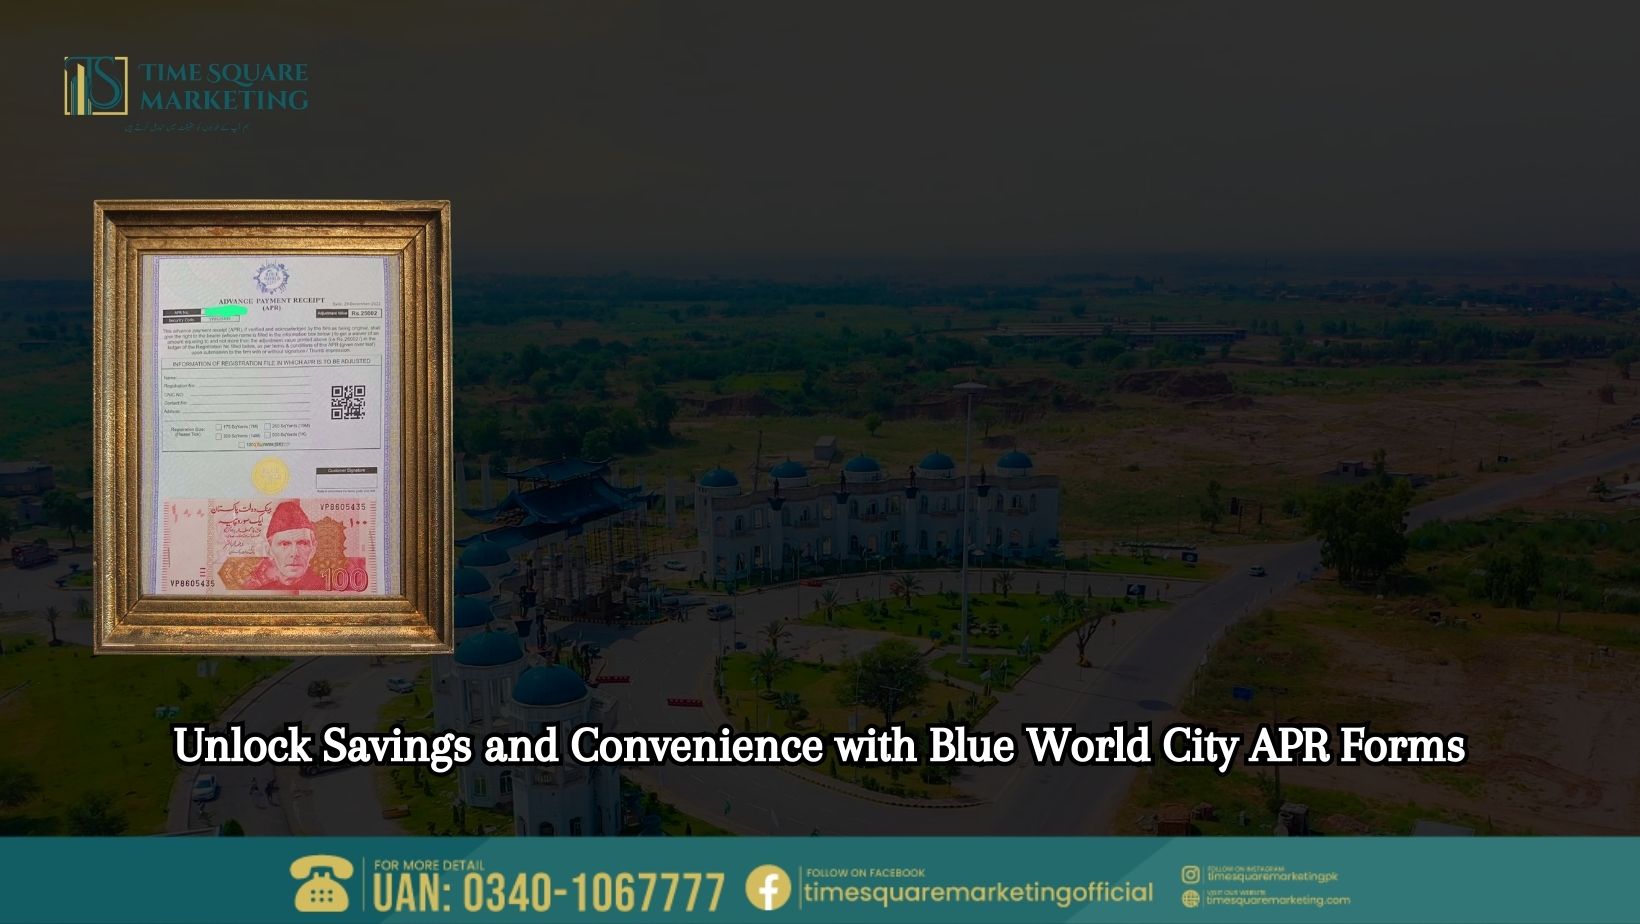 Unlock Savings and Convenience with Blue World City APR Forms